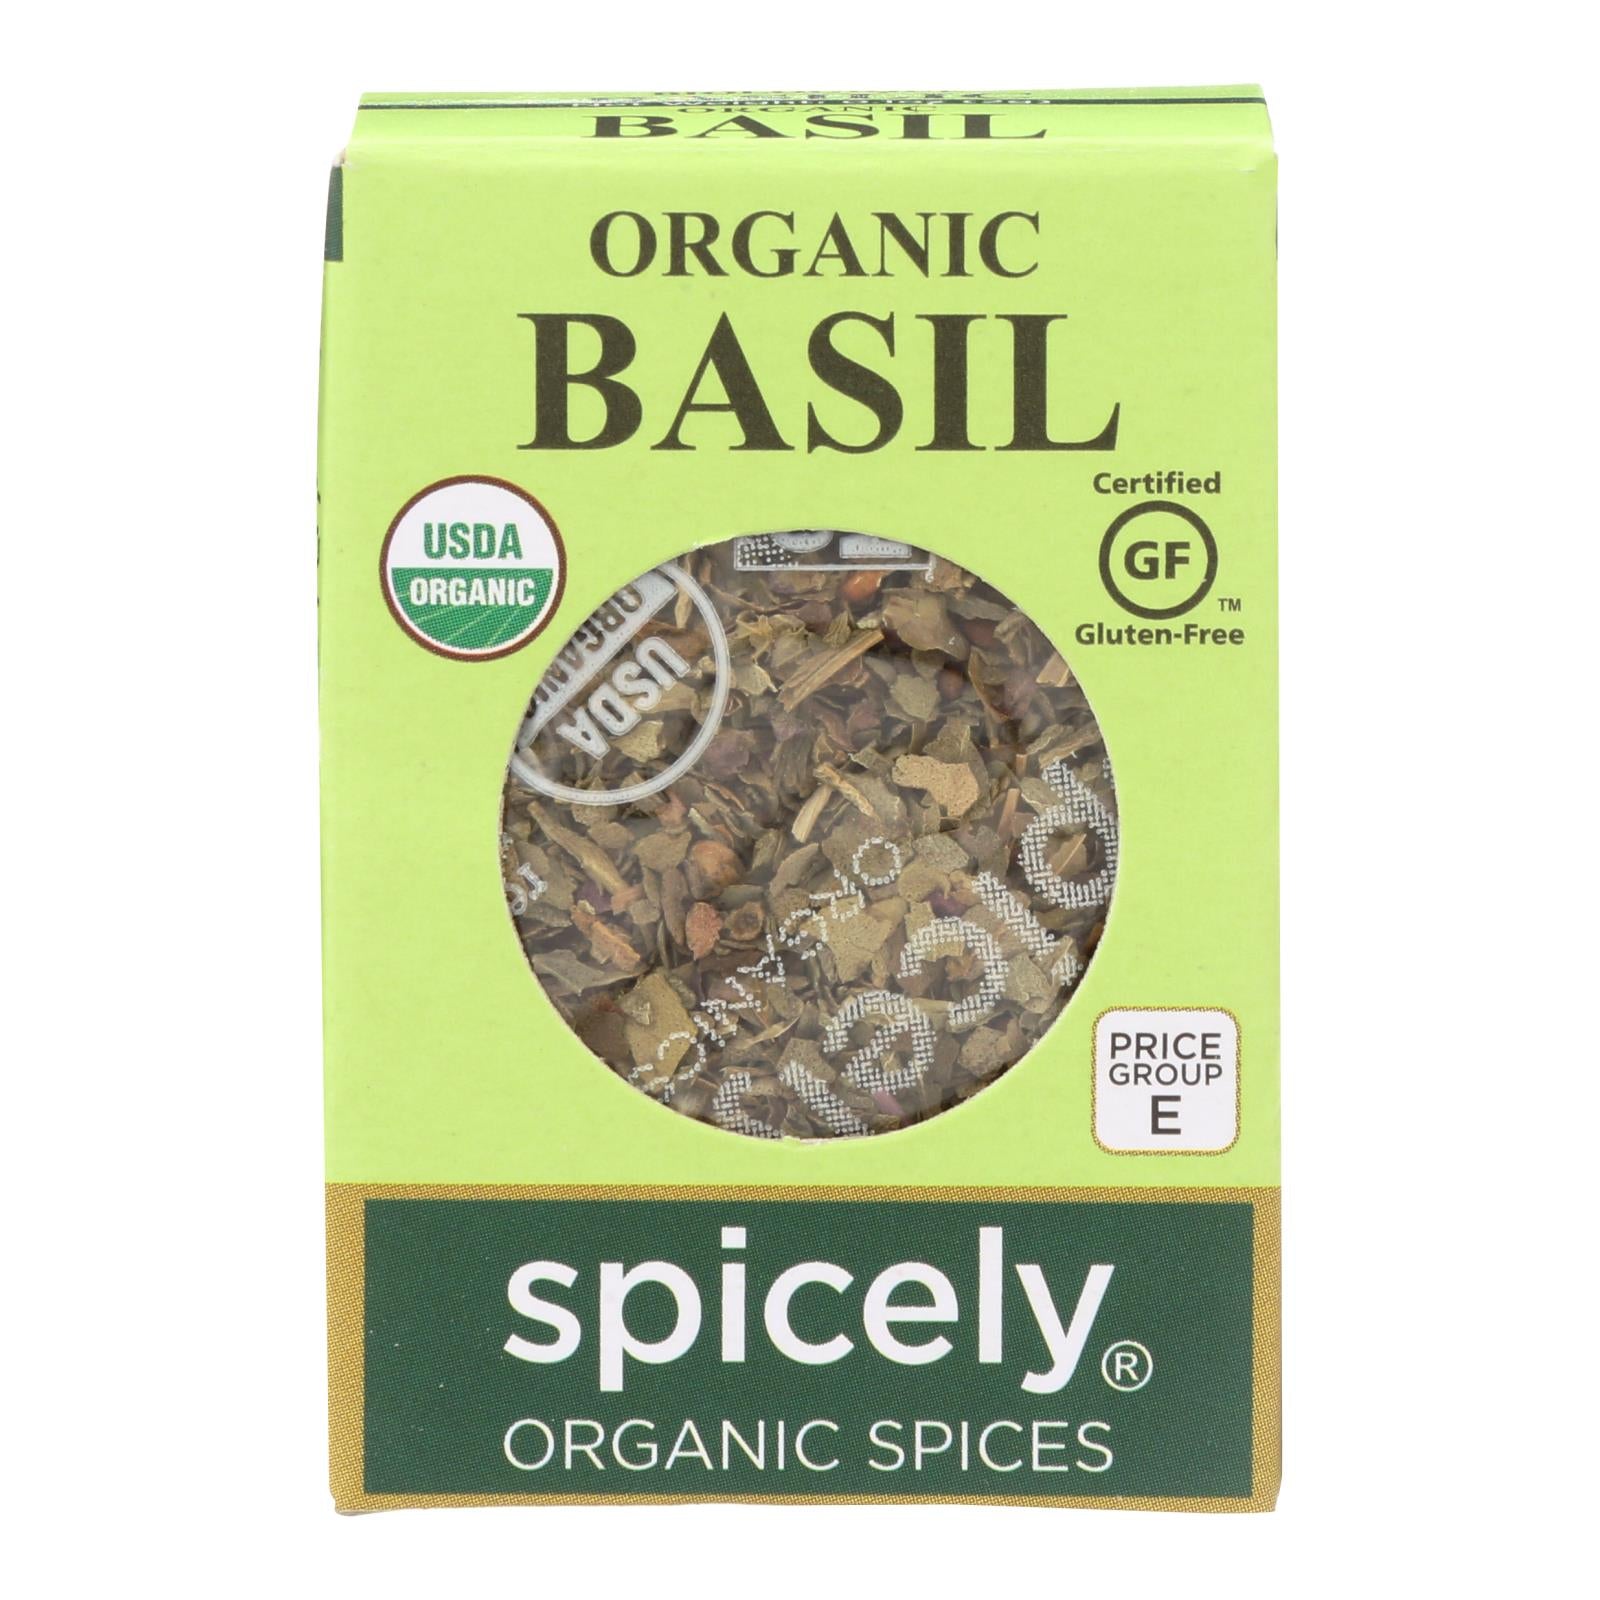 Spicely Organics - Organic Basil - Case Of 6 - 0.1 Oz. - Whole Green Foods